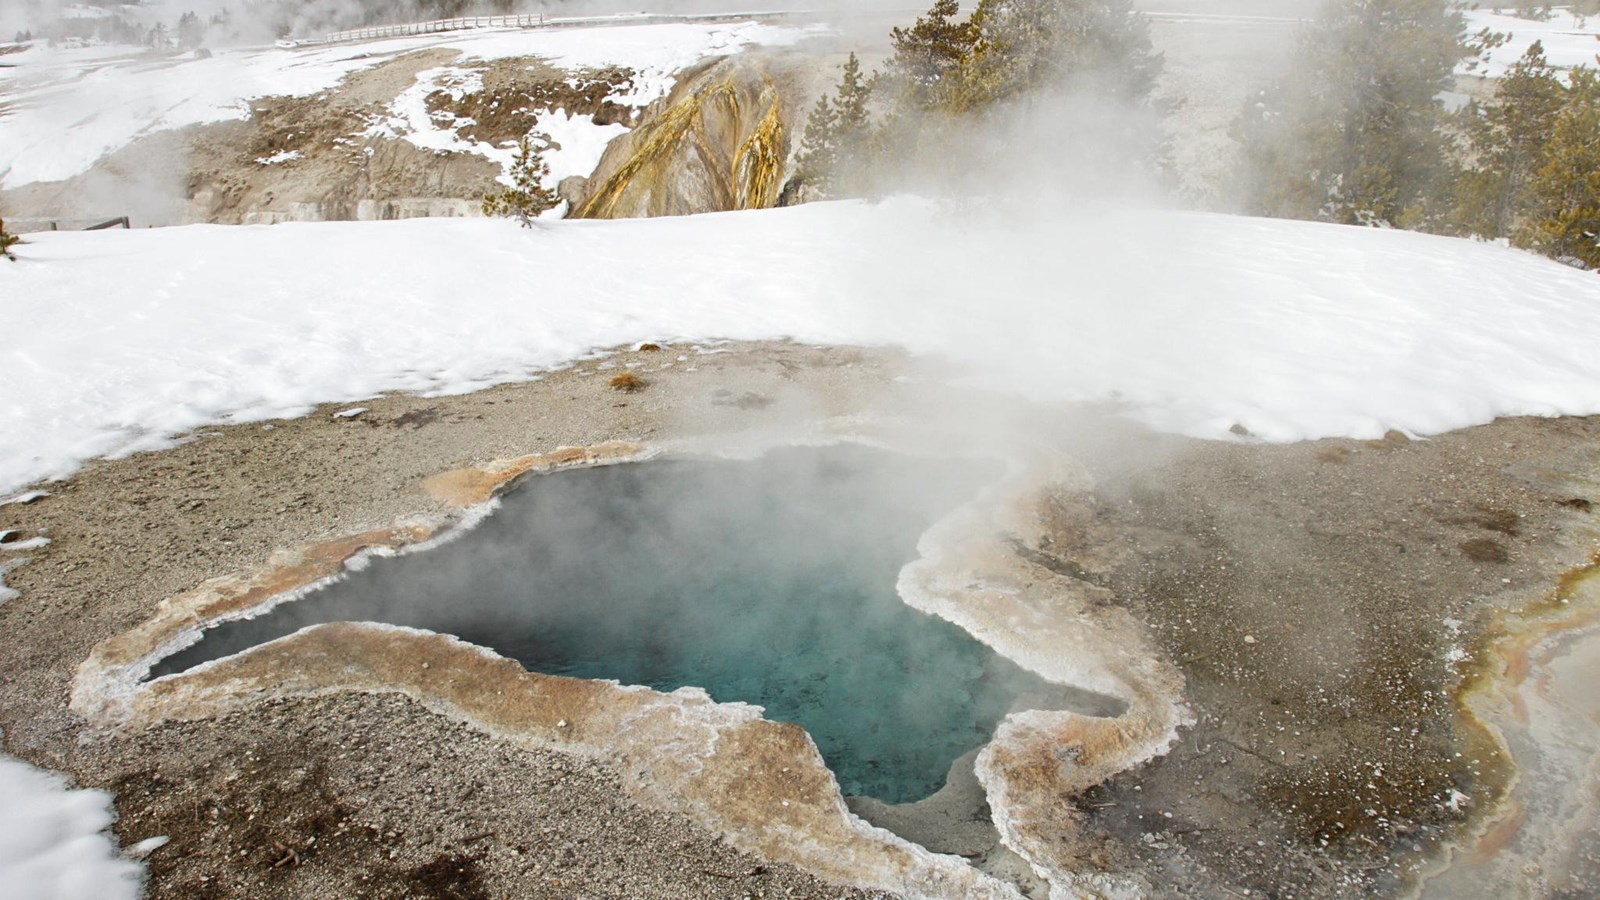 An irregular shaped, turquoise blue hot spring sits in a thermal basin covered in patchy snow.